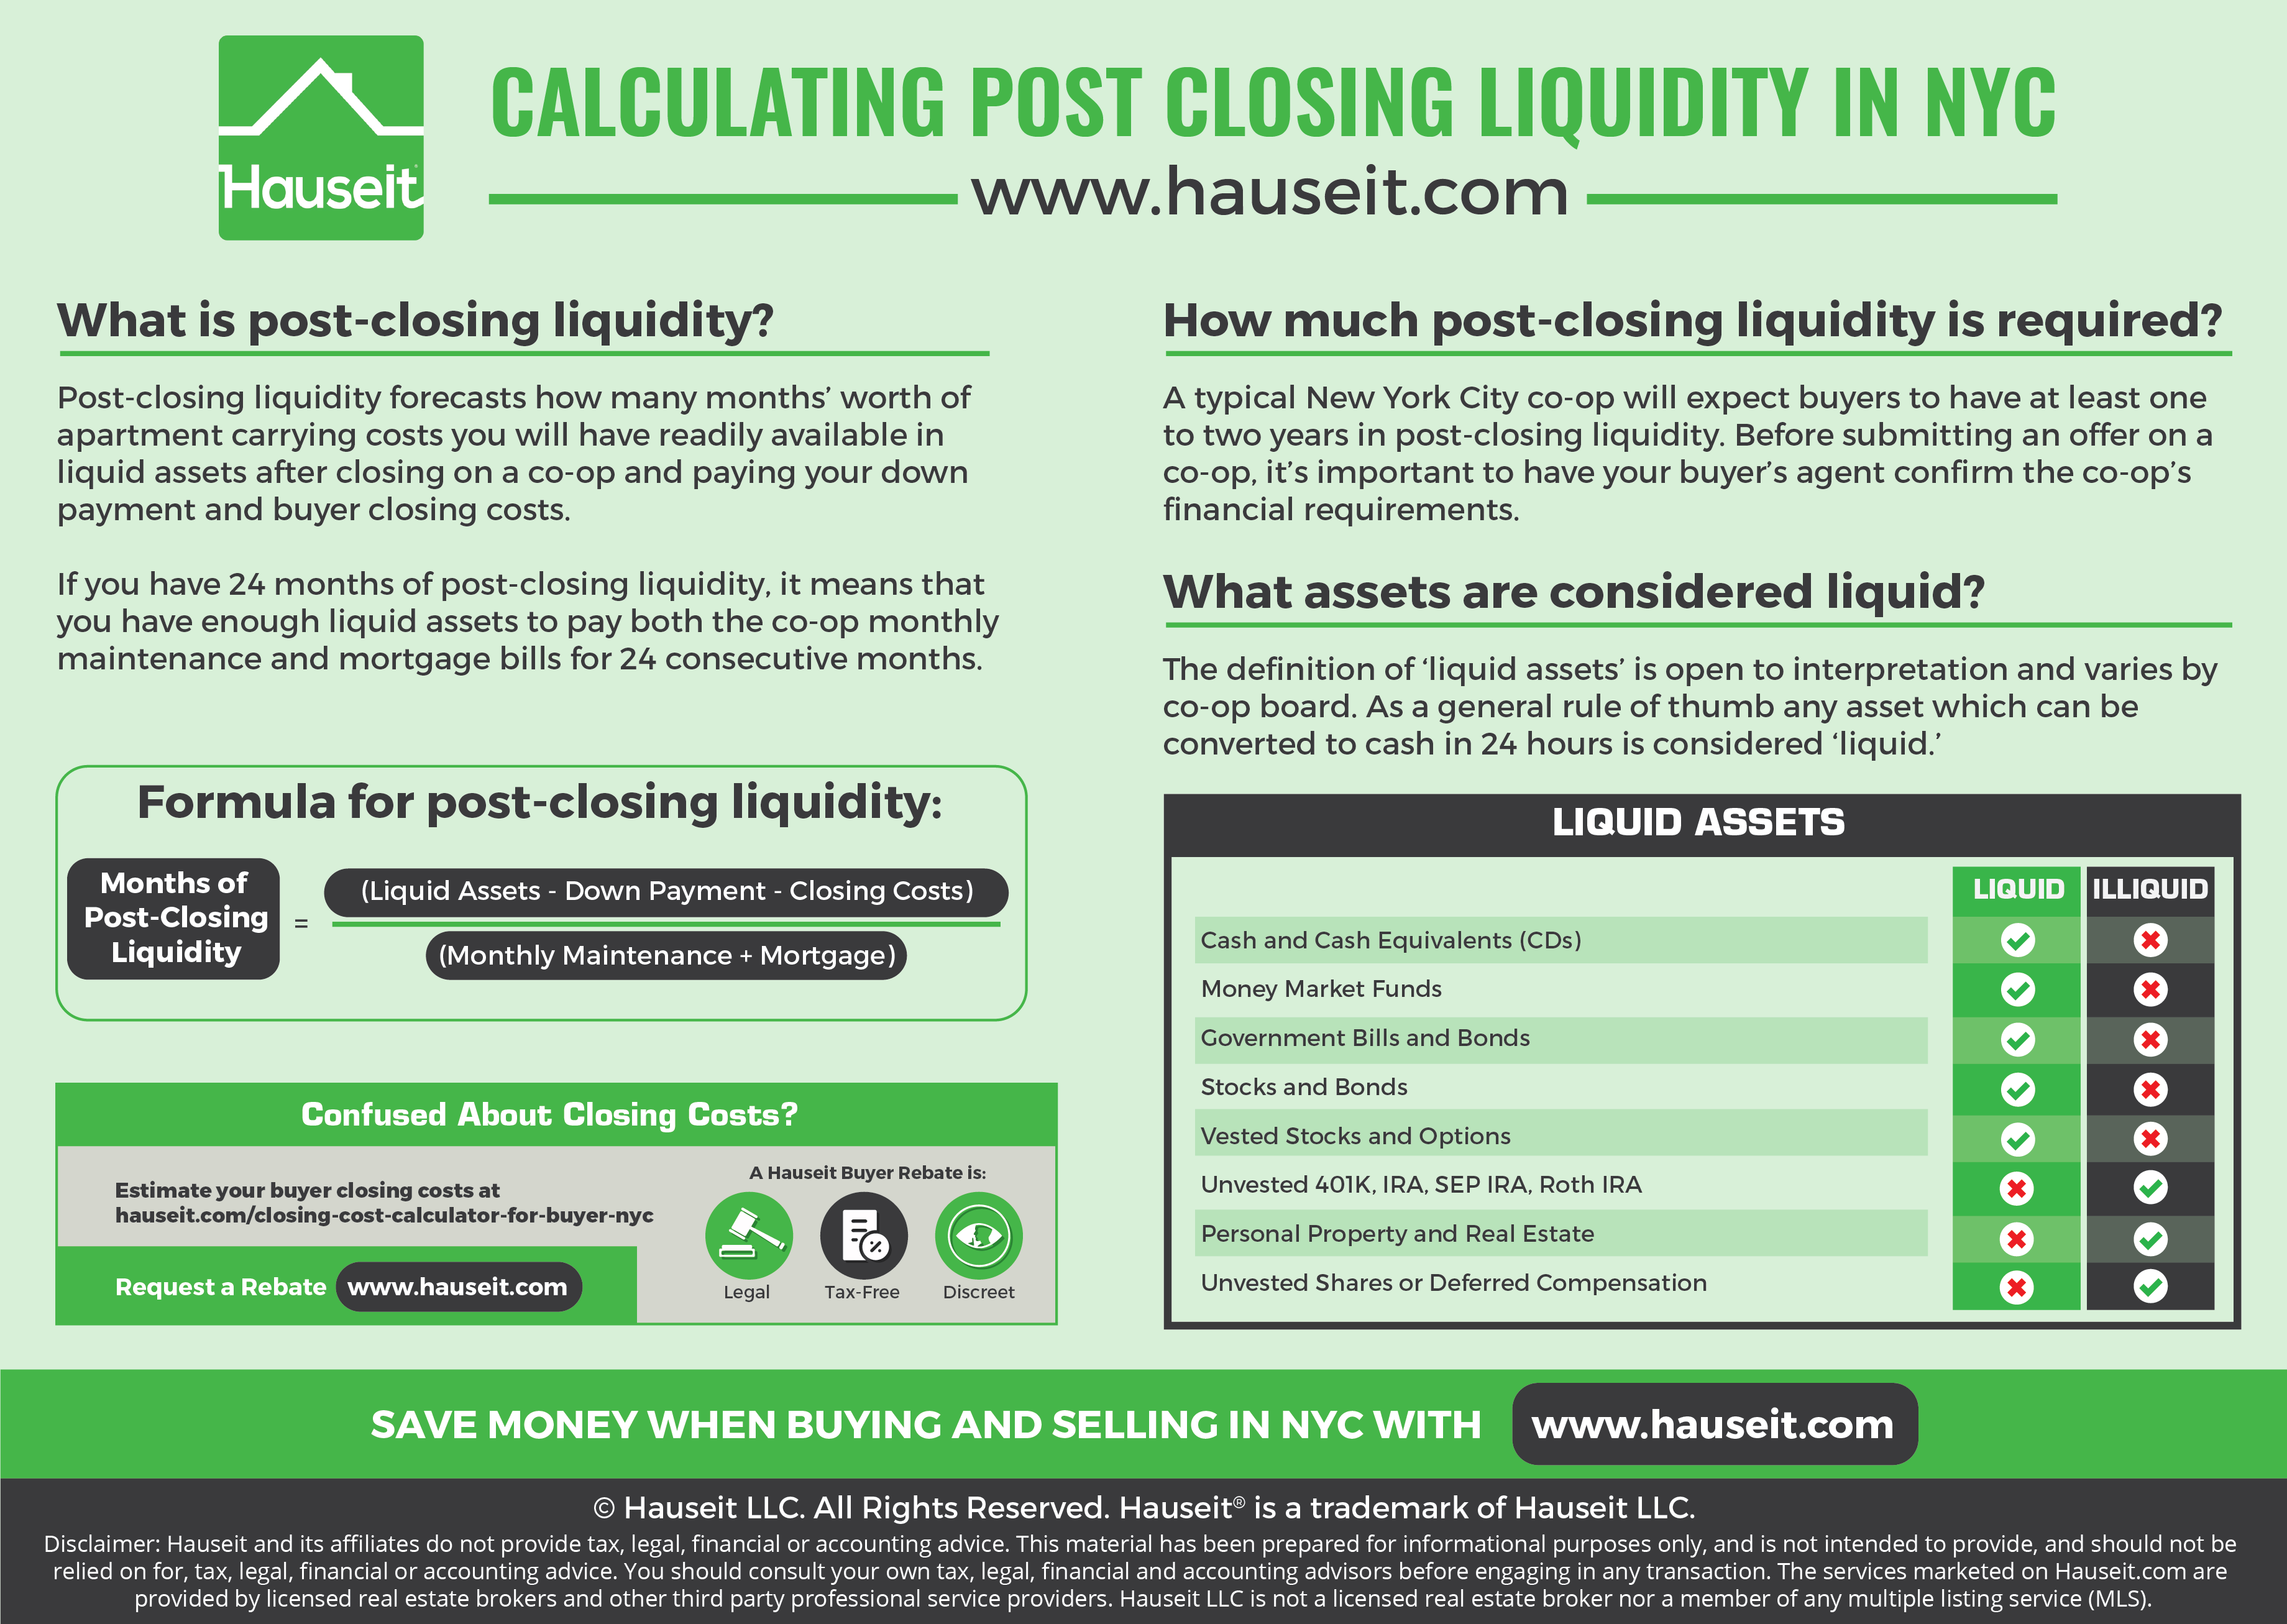 what is post-closing liquidity in nyc? how is it calculated for co-ops?